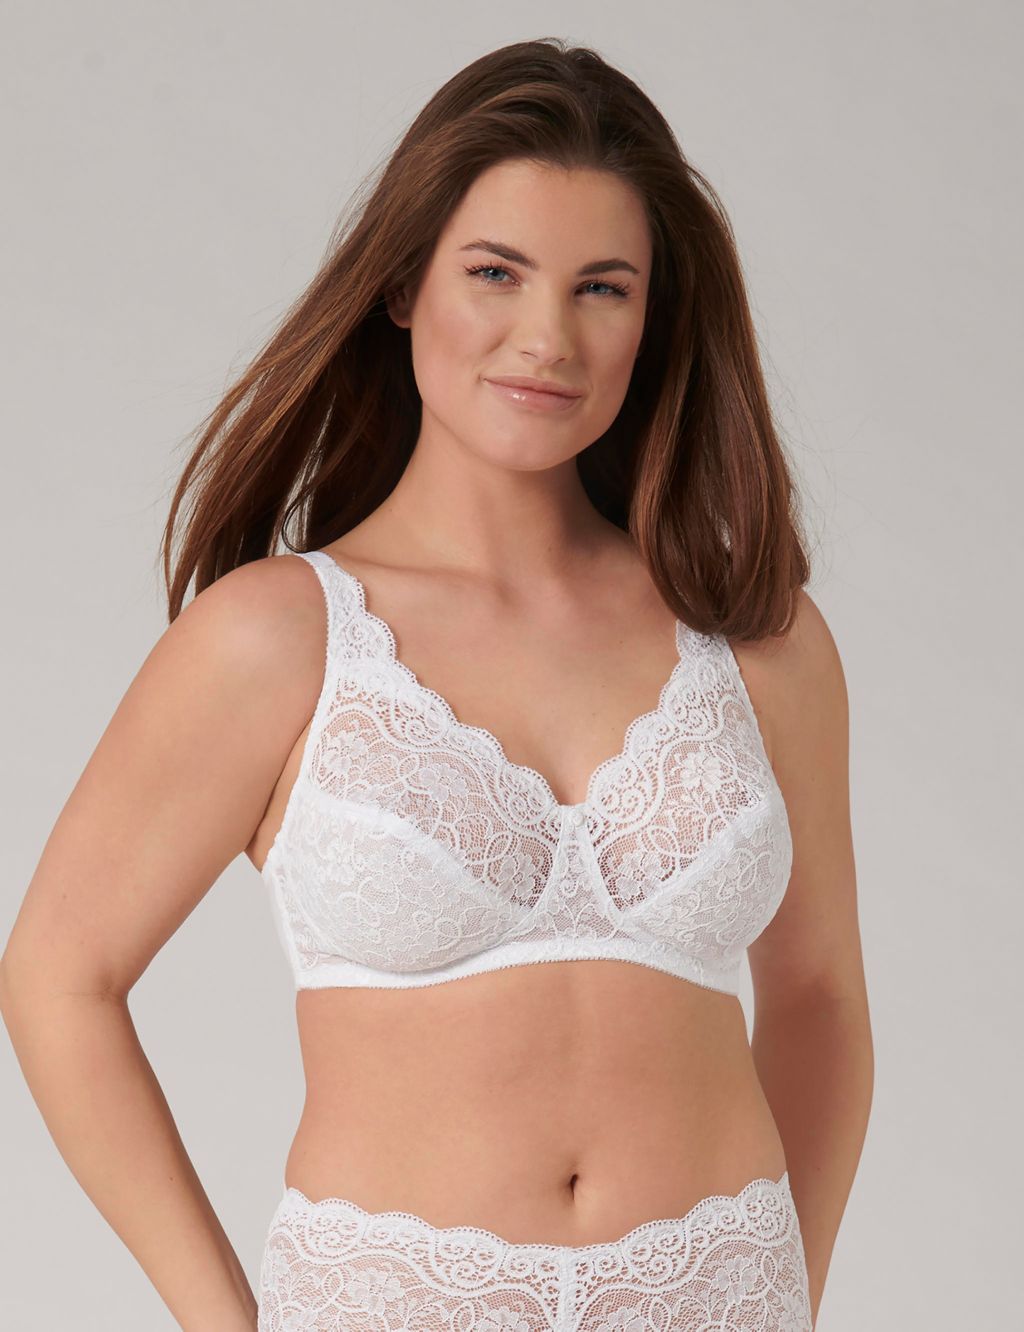 Amourette 300 Lace Non Wired Full Cup Bra image 1